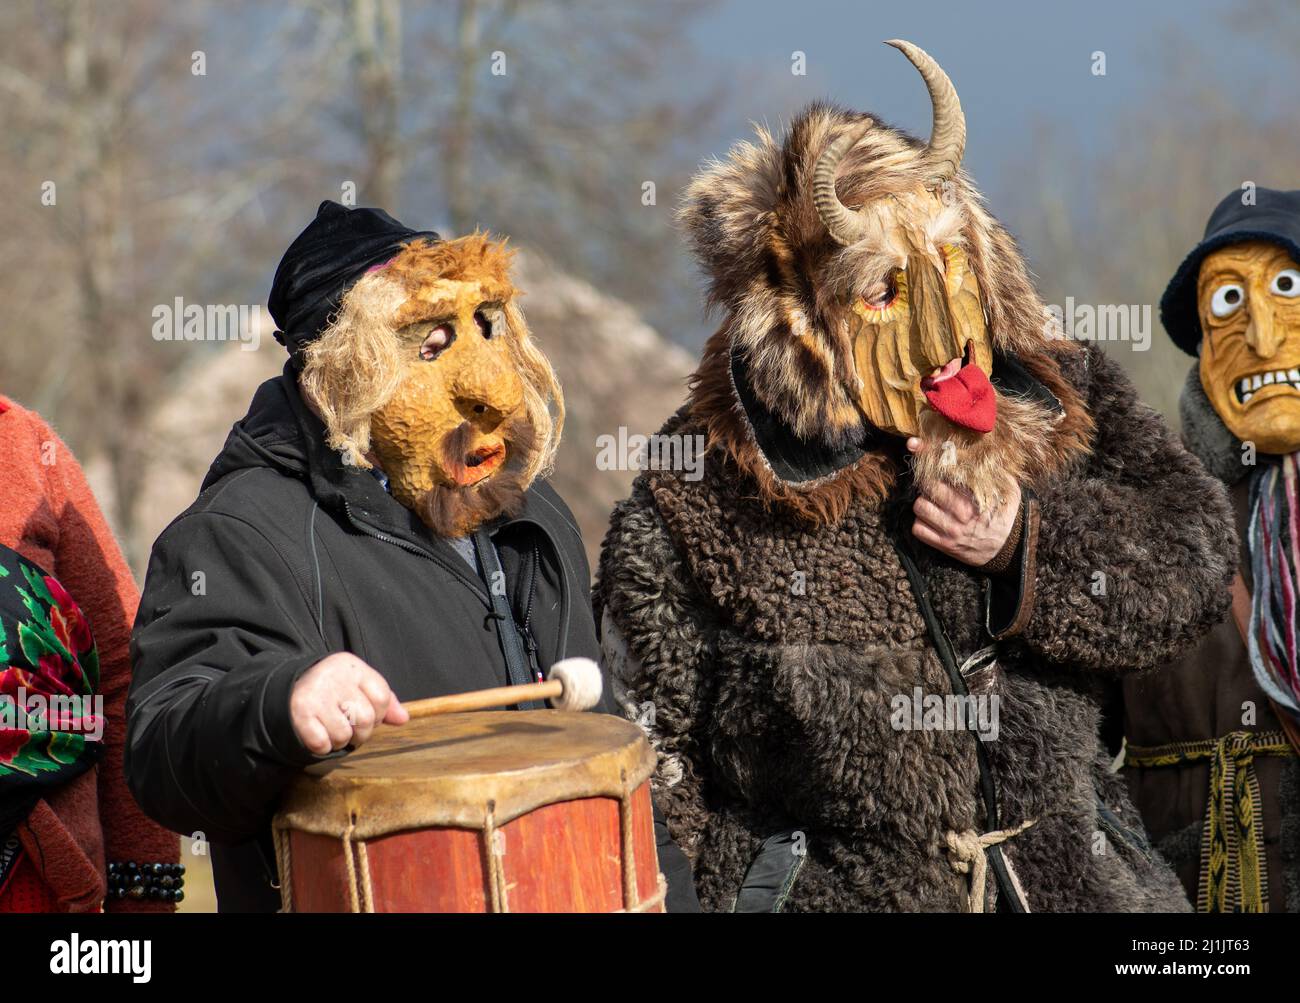 Rumsiskes, Lithuania - February 26 2022: Traditional masks in Rumsiskes, Lithuania during Uzgavenes, a Lithuanian folk festival during carnival Stock Photo